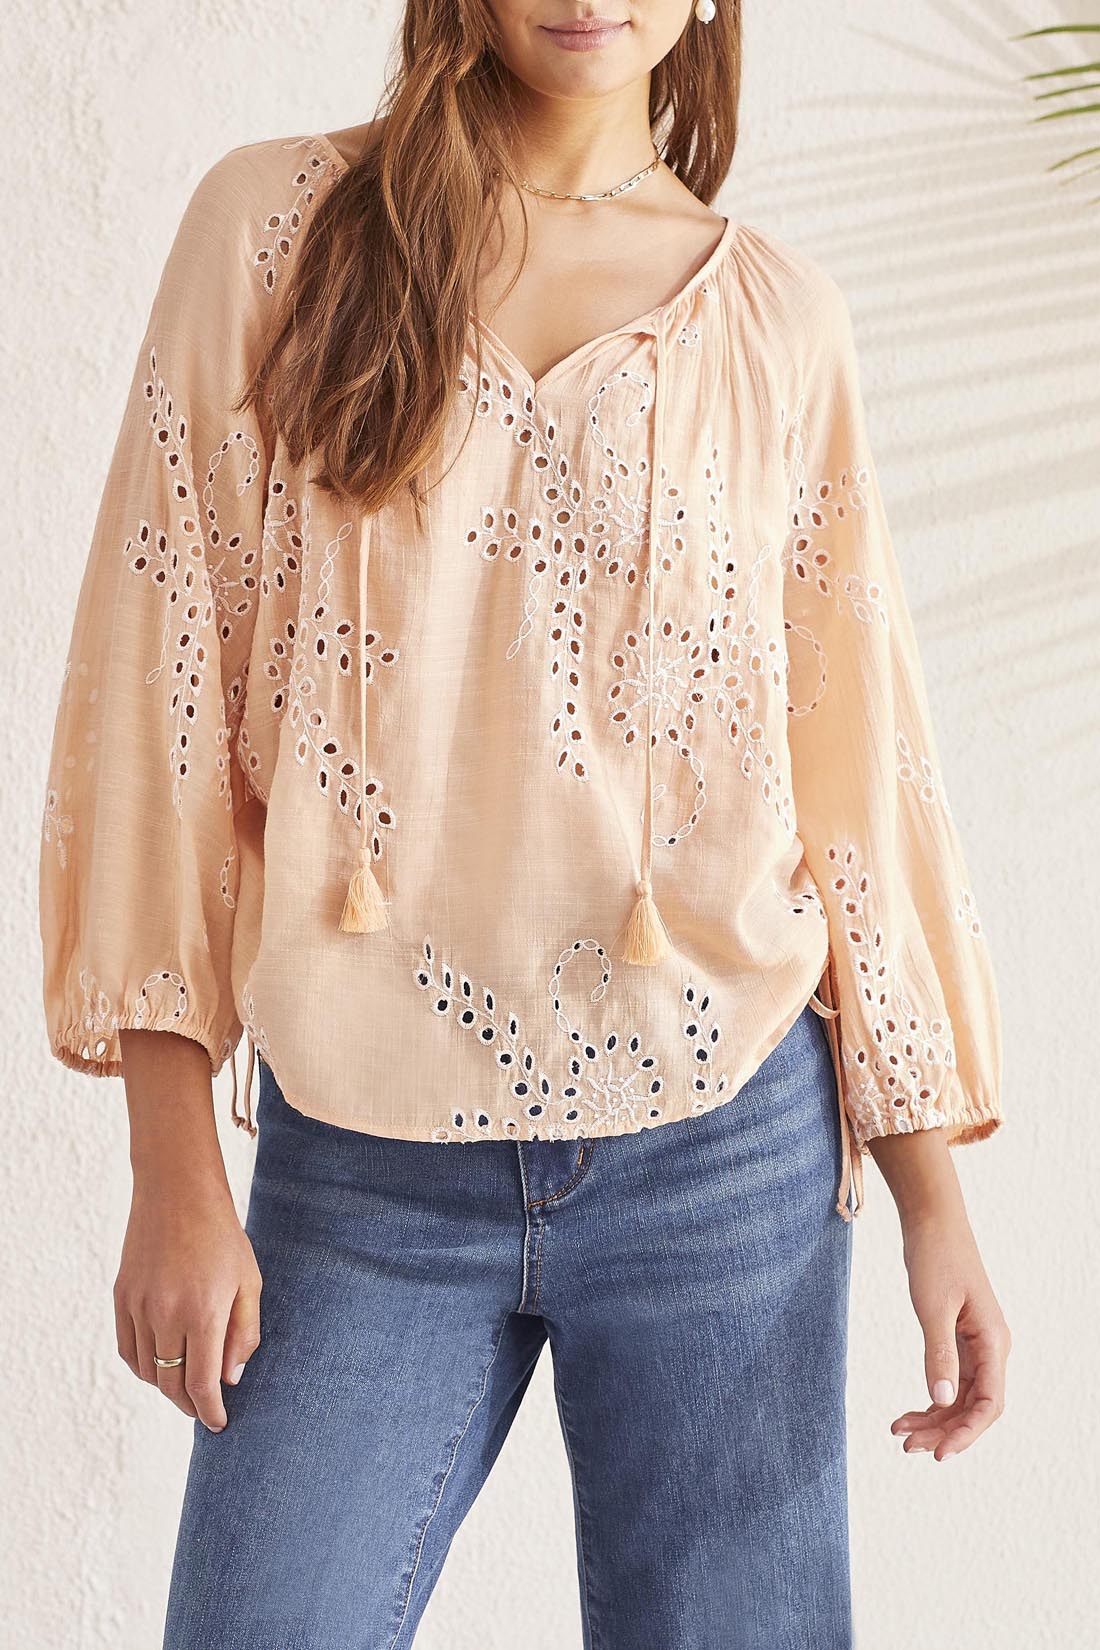 Tribal 3/4 Sleeve Blouse - Peach Sun Clothing - Tops - Shirts - Blouses - Blouses Opening Price by Tribal | Grace the Boutique